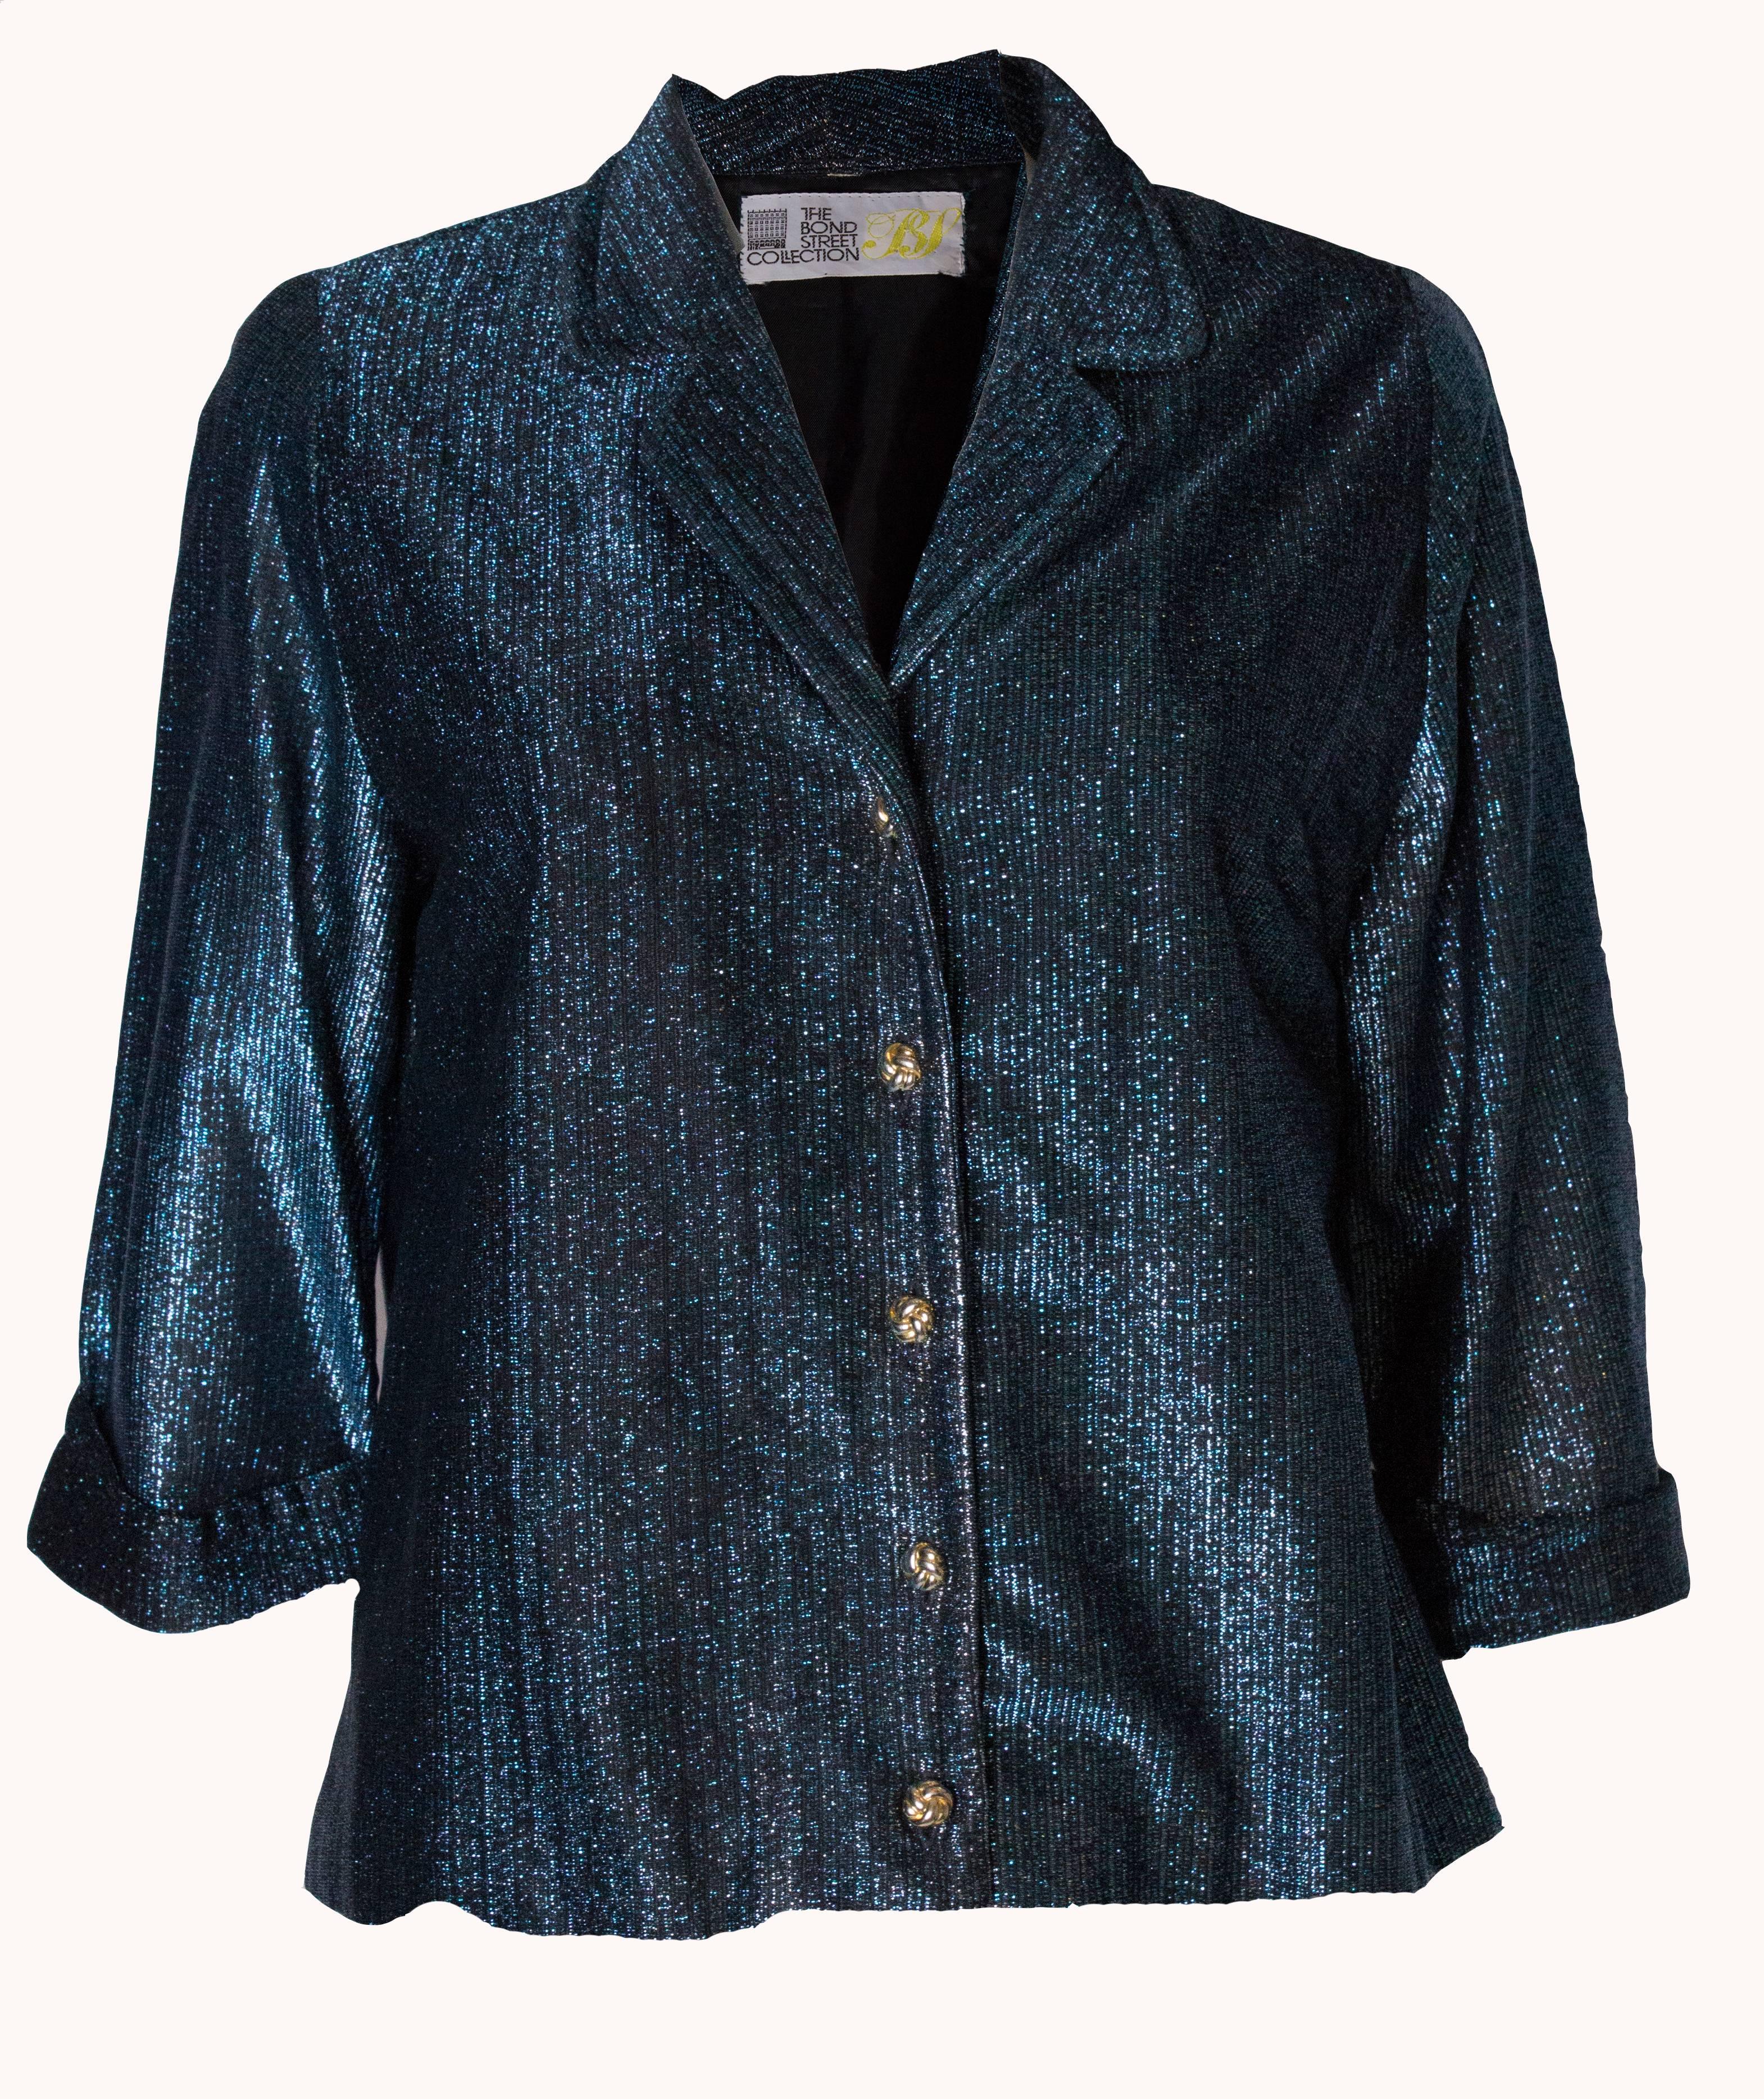 An easy to wear blue sparlkly jacket by Bond Street Collection. The jacket has elbow length sleeves with a small turn up,and a five gold button opening at the front.